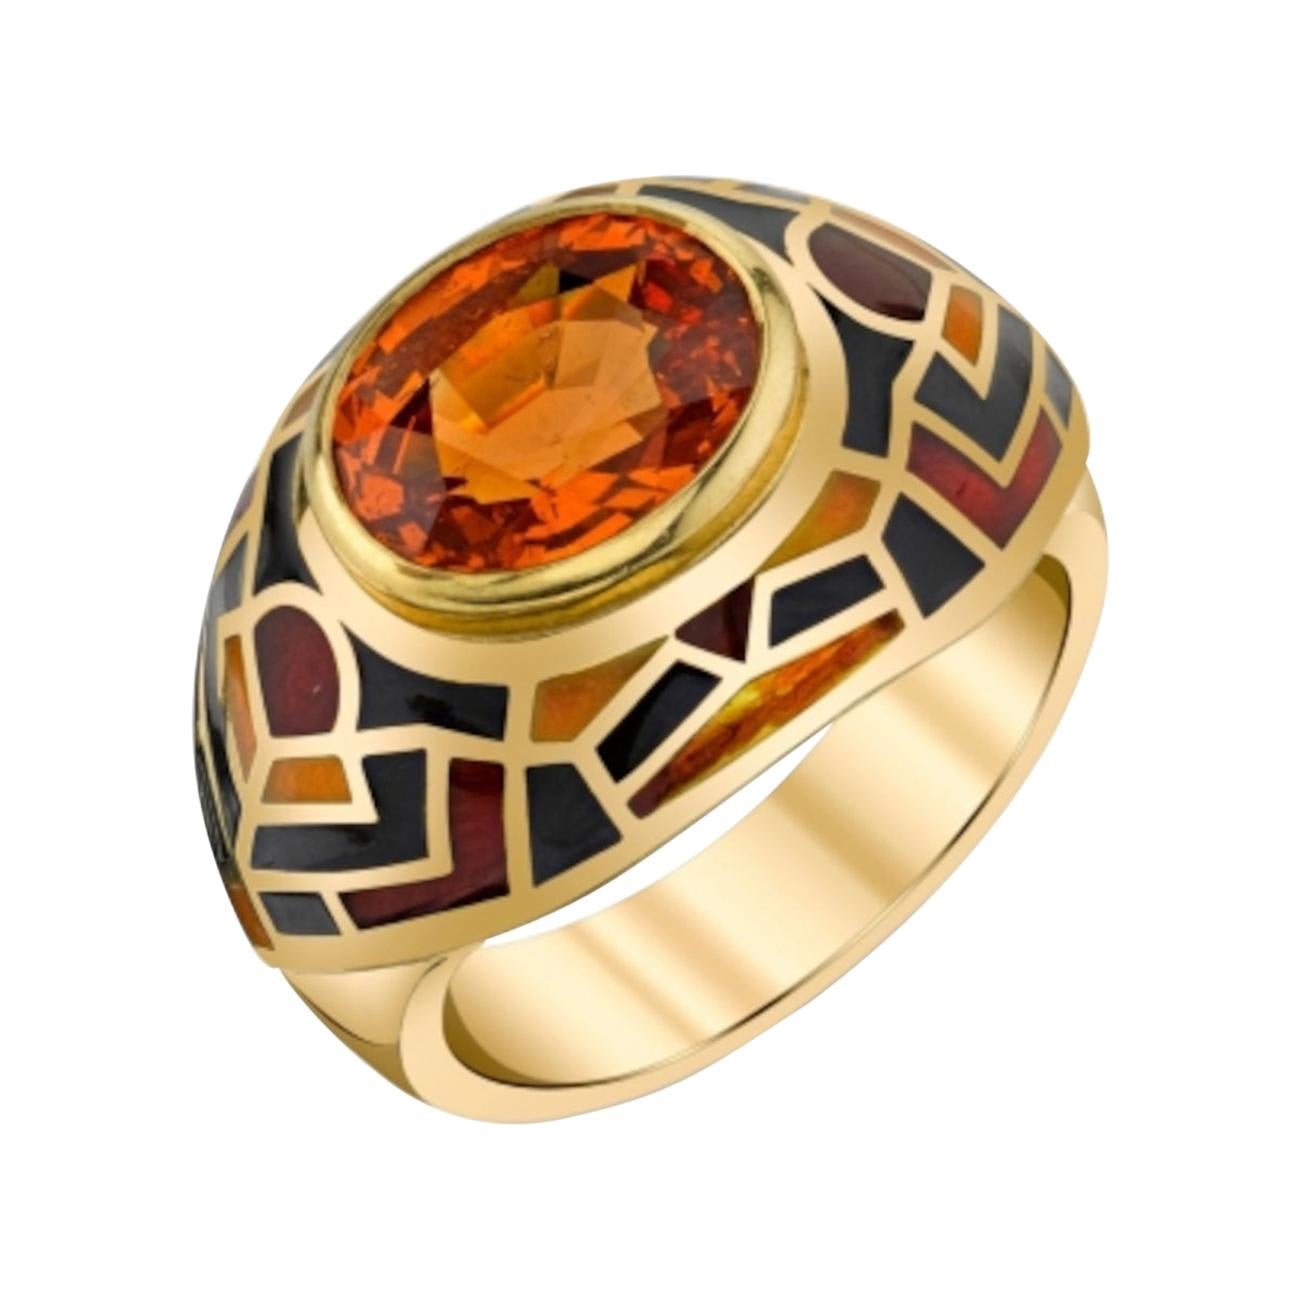 Spessartite Garnet Ring in Gold with Multi-Colored Vitreous Enamel, 5.72 Carats For Sale